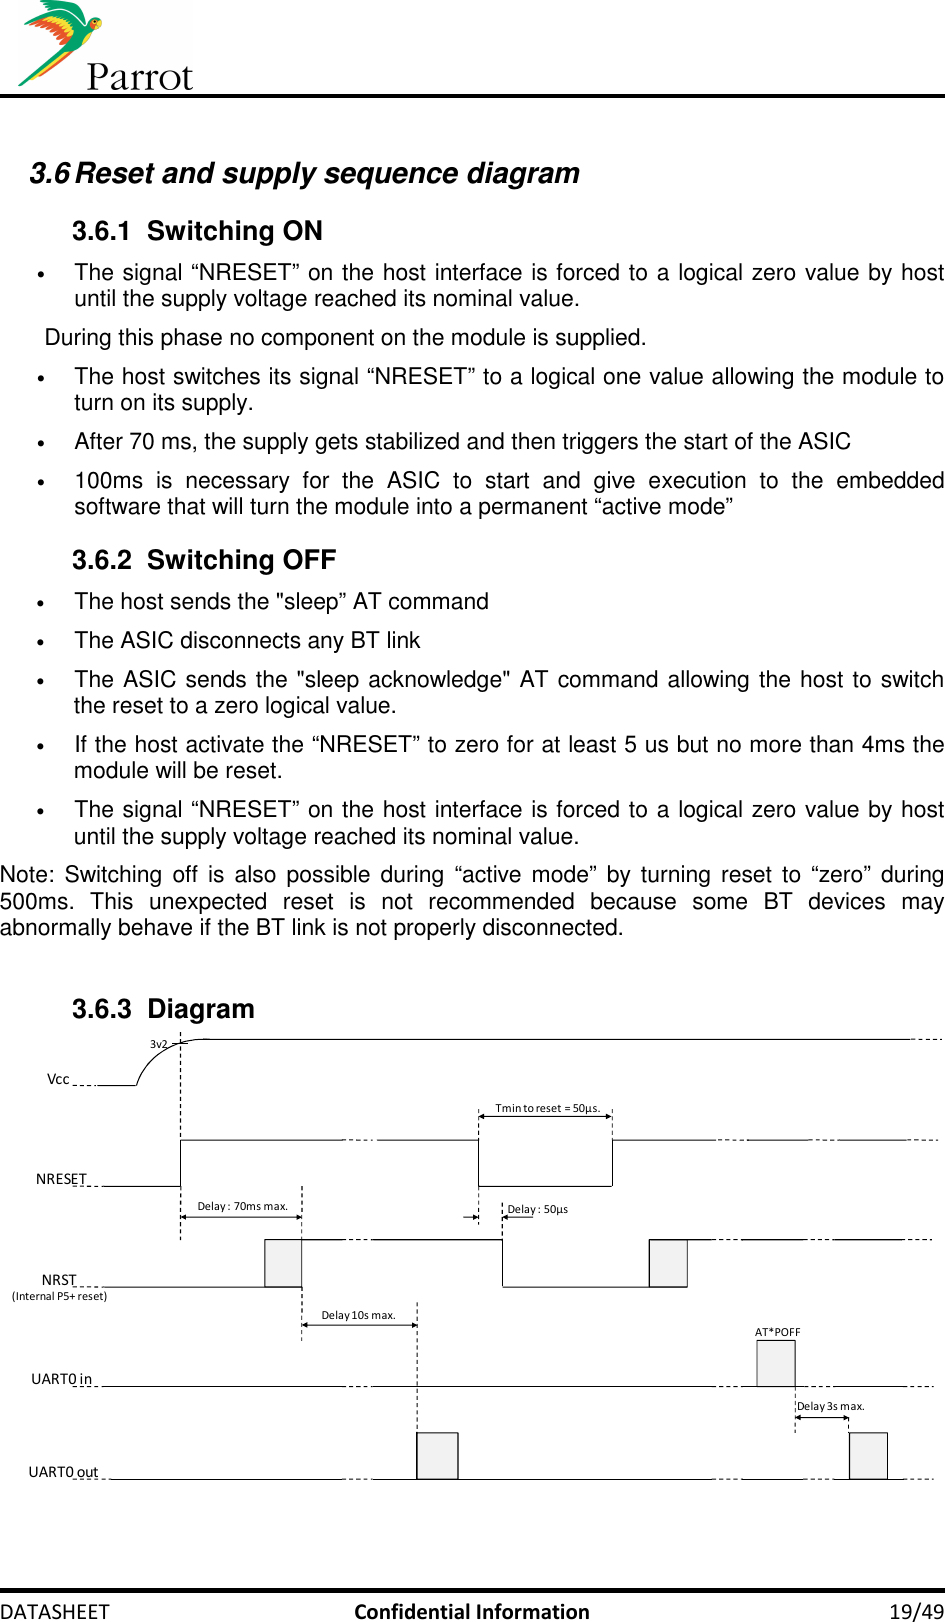     DATASHEET  Confidential Information  19/49  3.6 Reset and supply sequence diagram 3.6.1  Switching ON • The signal “NRESET” on the host interface is forced to a logical zero value by host until the supply voltage reached its nominal value. During this phase no component on the module is supplied. • The host switches its signal “NRESET” to a logical one value allowing the module to turn on its supply. • After 70 ms, the supply gets stabilized and then triggers the start of the ASIC • 100ms  is  necessary  for  the  ASIC  to  start  and  give  execution  to  the  embedded software that will turn the module into a permanent “active mode” 3.6.2  Switching OFF • The host sends the &quot;sleep” AT command • The ASIC disconnects any BT link • The ASIC sends the &quot;sleep acknowledge&quot; AT command allowing the host to switch the reset to a zero logical value. • If the host activate the “NRESET” to zero for at least 5 us but no more than 4ms the module will be reset. • The signal “NRESET” on the host interface is forced to a logical zero value by host until the supply voltage reached its nominal value. Note:  Switching off is also possible during  “active mode” by turning reset to “zero” during 500ms.  This  unexpected  reset  is  not  recommended  because  some  BT  devices  may abnormally behave if the BT link is not properly disconnected.  3.6.3  Diagram NRST(Internal P5+ reset)UART0 outDelay : 70ms max.AT*POFFUART0 inNRESETVccTmin to reset = 50µs.Delay 10s max.Delay 3s max.Delay : 50µs3v2 